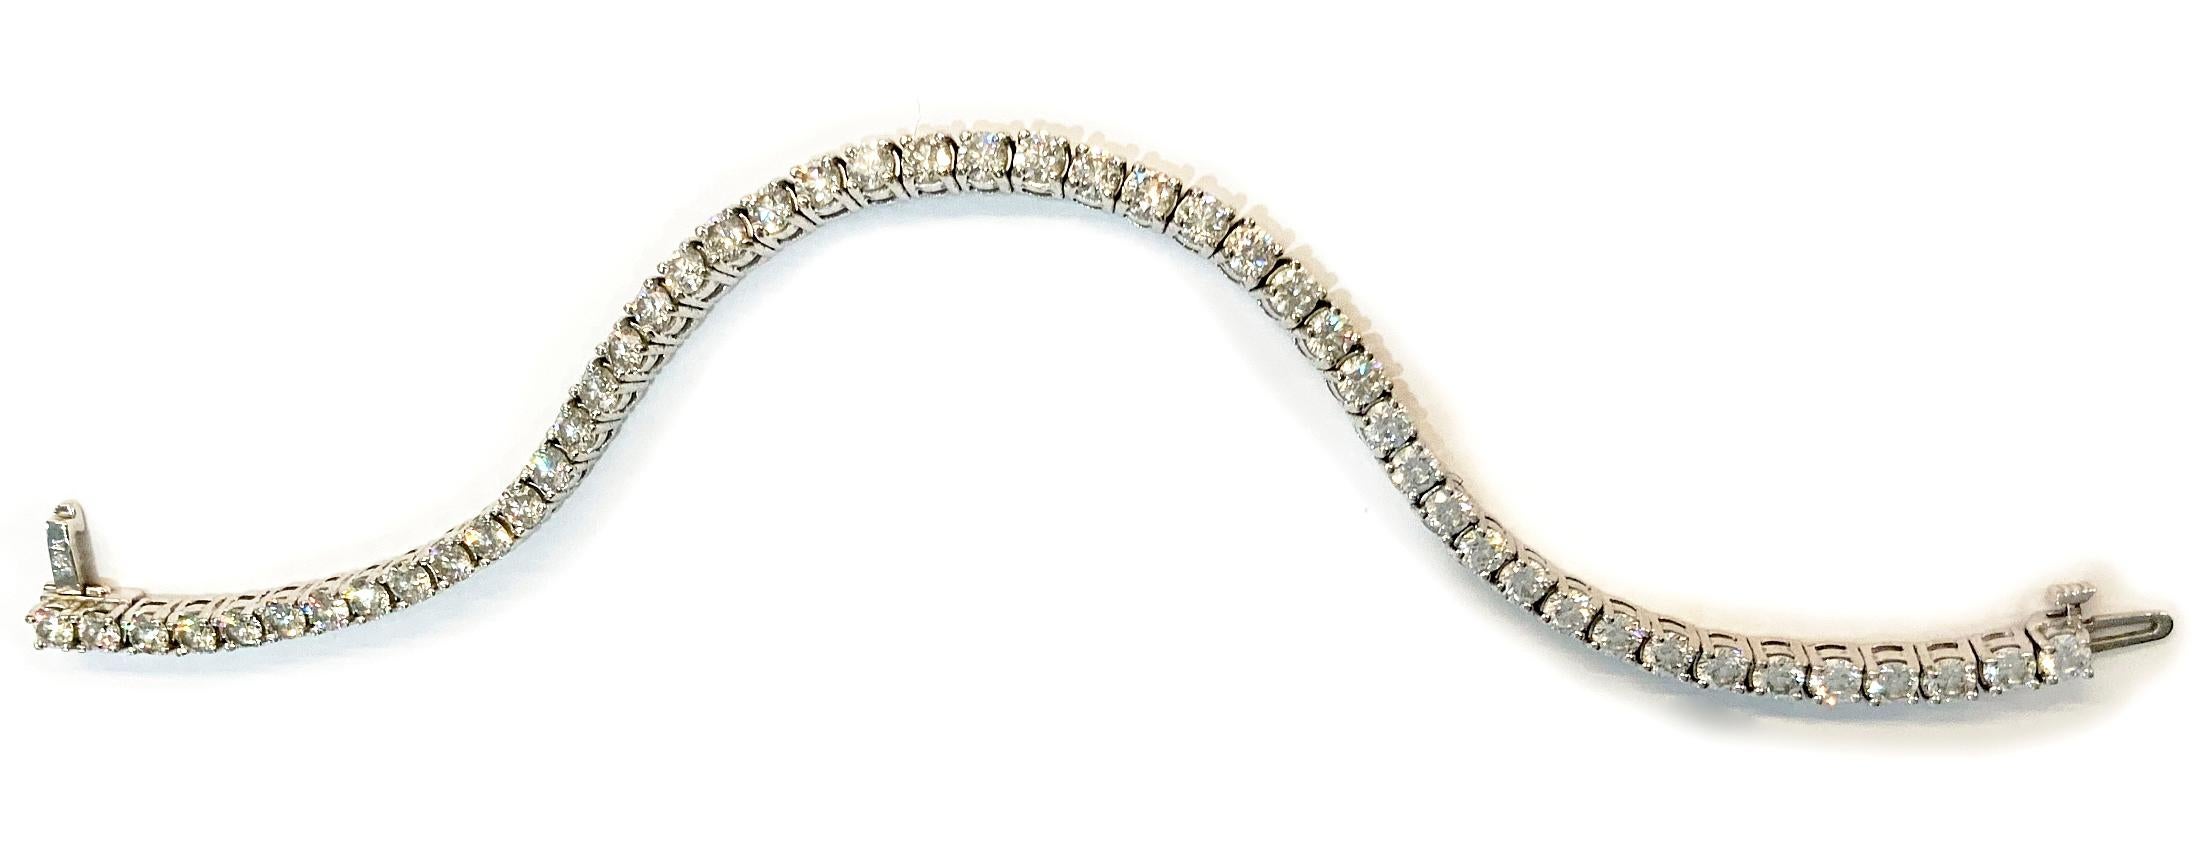 Designed to hold 8.20 Carat Diamond VS1 ( Fine Quality ) in G Color, this classic and gorgeous tennis Bracelet in White Gold has 47 Sparkling round brilliant cut diamonds. This sophisticated tennis bracelet keeps securely on the wrist when worn,